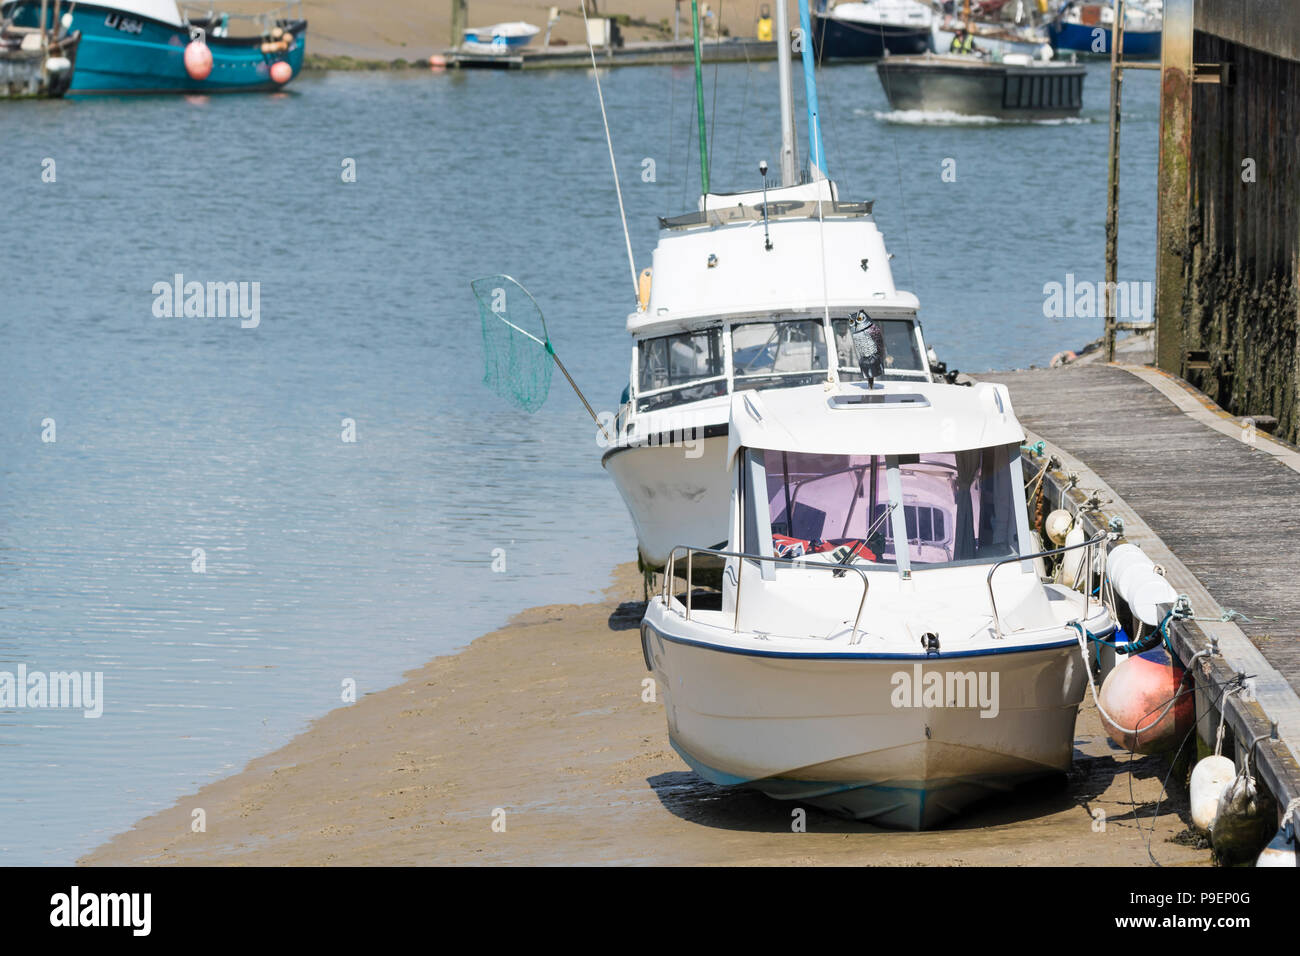 Small pleasure boats moored up on a river at low tide, resting on sand banks on the River Arun in Littlehampton, West Sussex, England, UK. Stock Photo